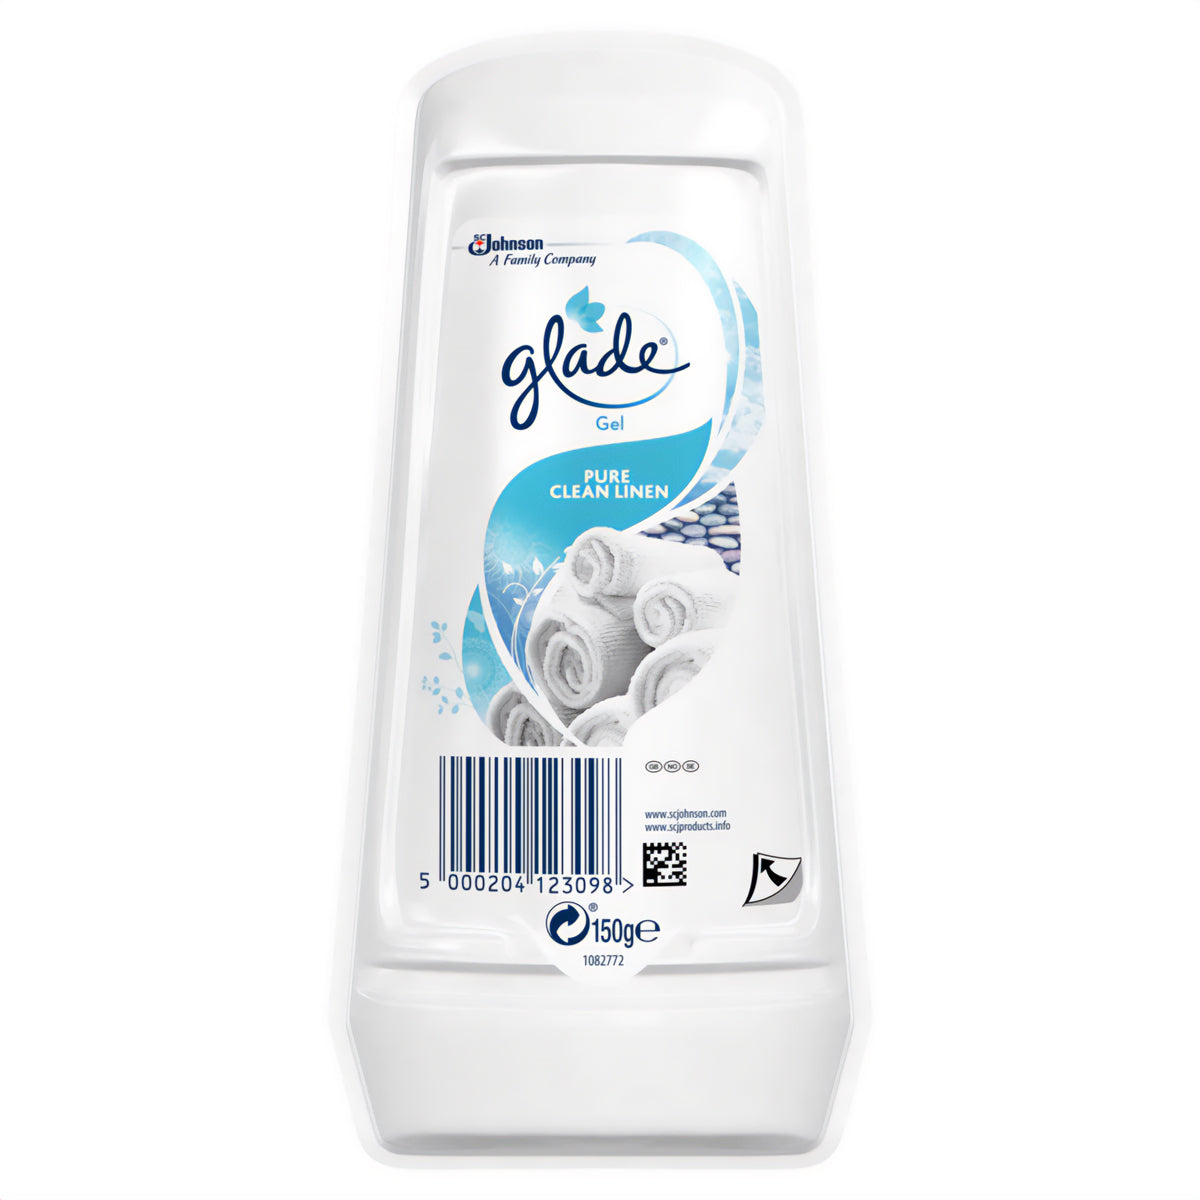 Glade - Gel Air Freshener Pure Clean Linen - 150g - Continental Food Store